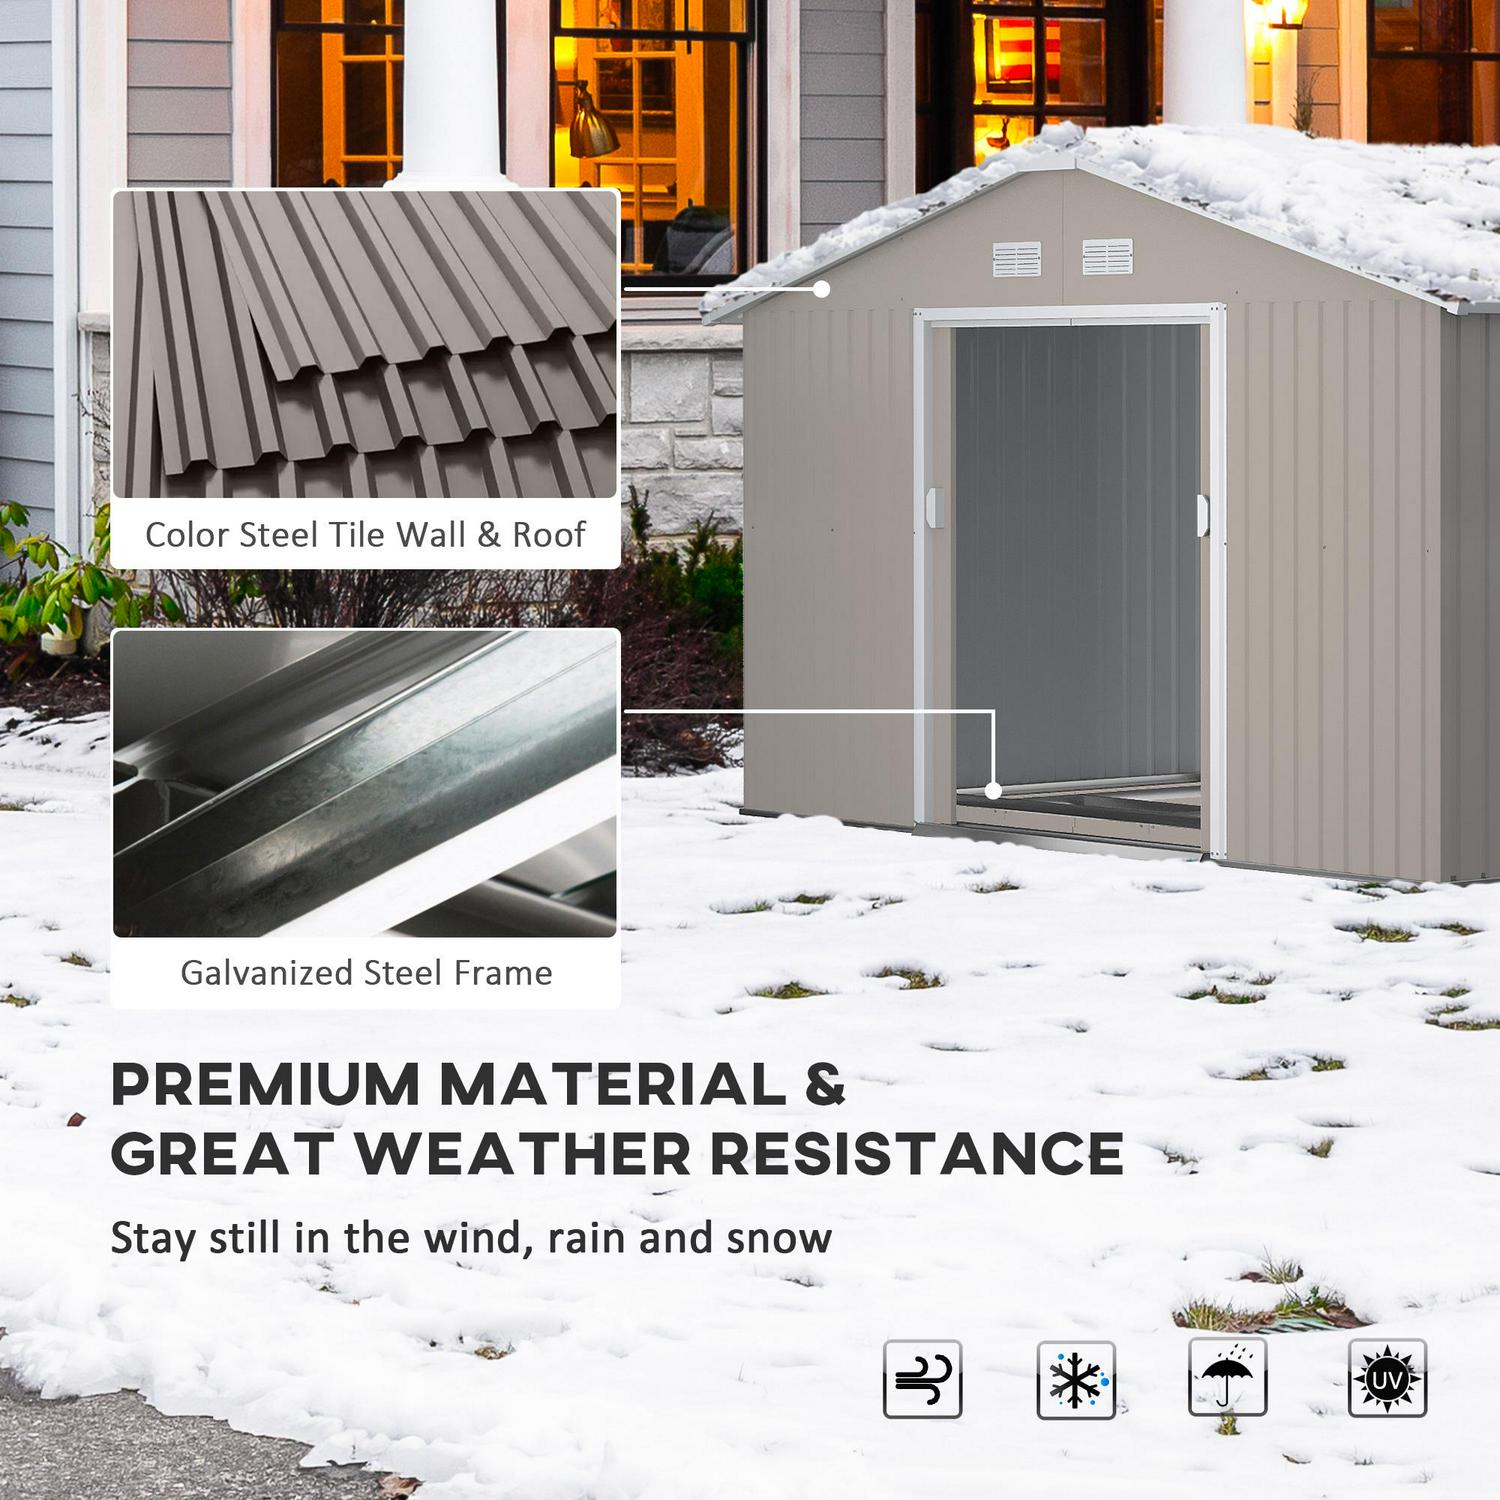 Garden Metal Storage Shed Outdoor With Foundation Ventilation And Doors, Light Grey (13 X 11)ft